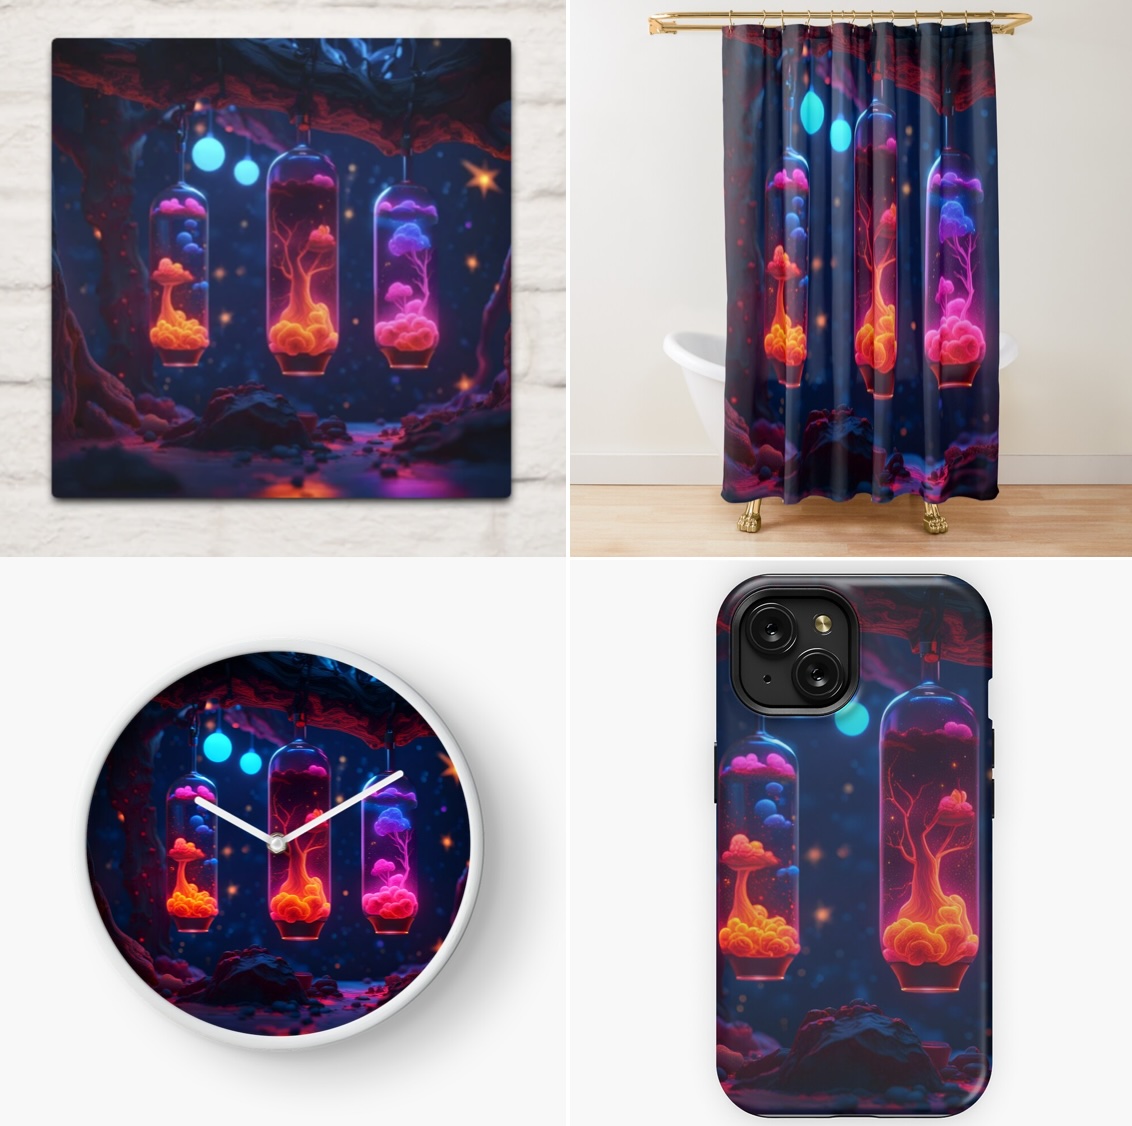 <#Lava #Lamps on Tree> #AICreation on #ArtPrint #Clock #iPhoneCase #ShowerCurtain on my #Redbubble & #teepublic

redbubble.com/shop/ap/157497…
teepublic.com/poster-and-art…

#giftforfriends #menclothes #womenclothes #neondesign #fairydesign #throwblanket #bag #homedecor